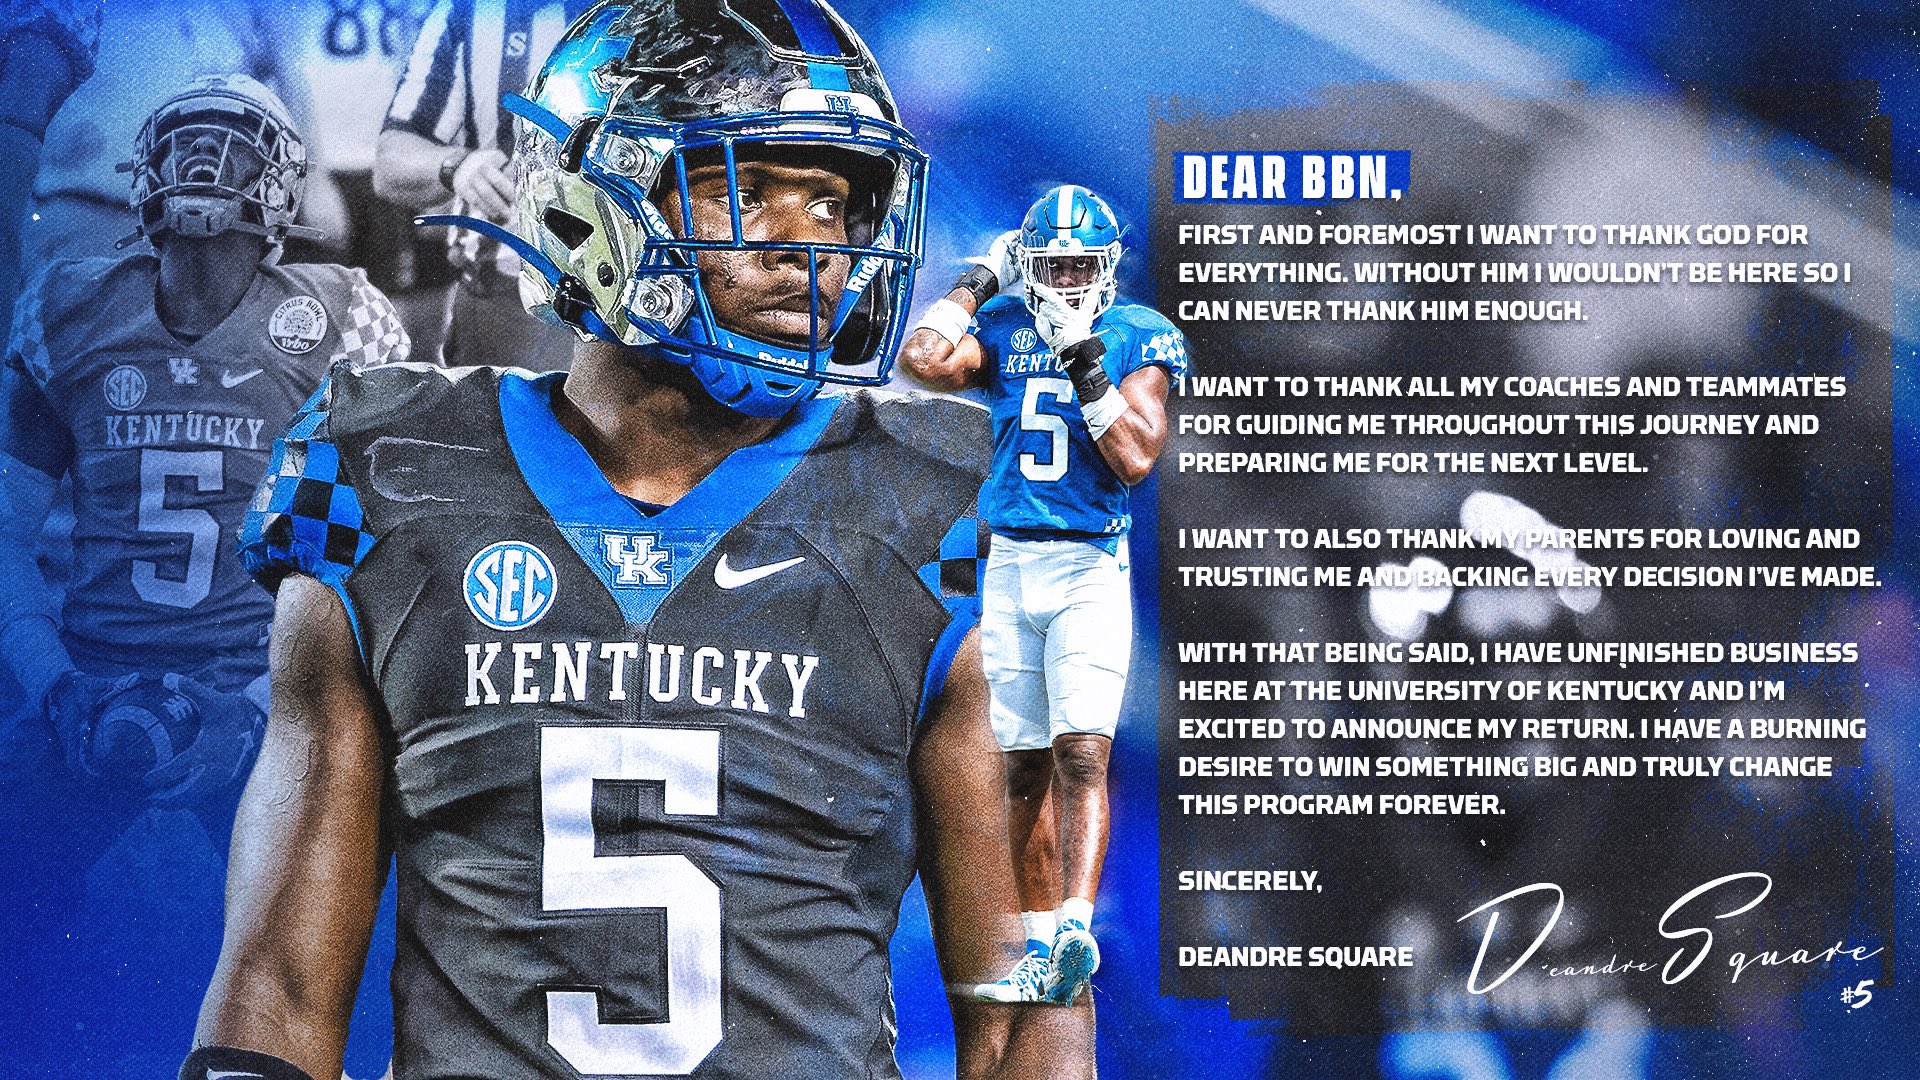 DeAndre Square will return to Kentucky